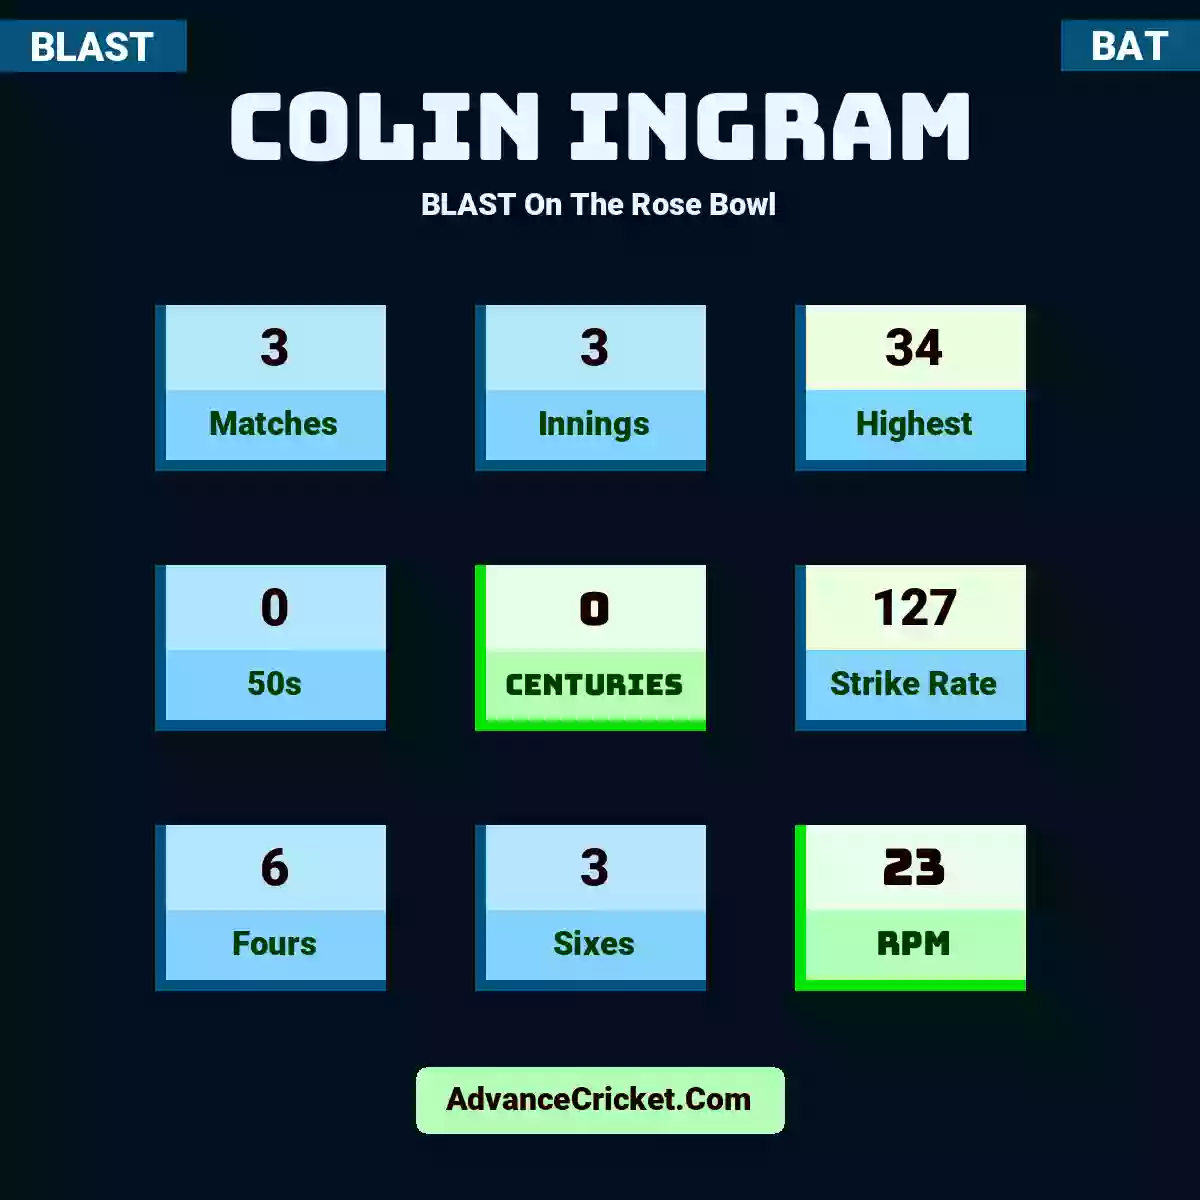 Colin Ingram BLAST  On The Rose Bowl, Colin Ingram played 3 matches, scored 34 runs as highest, 0 half-centuries, and 0 centuries, with a strike rate of 127. C.Ingram hit 6 fours and 3 sixes, with an RPM of 23.